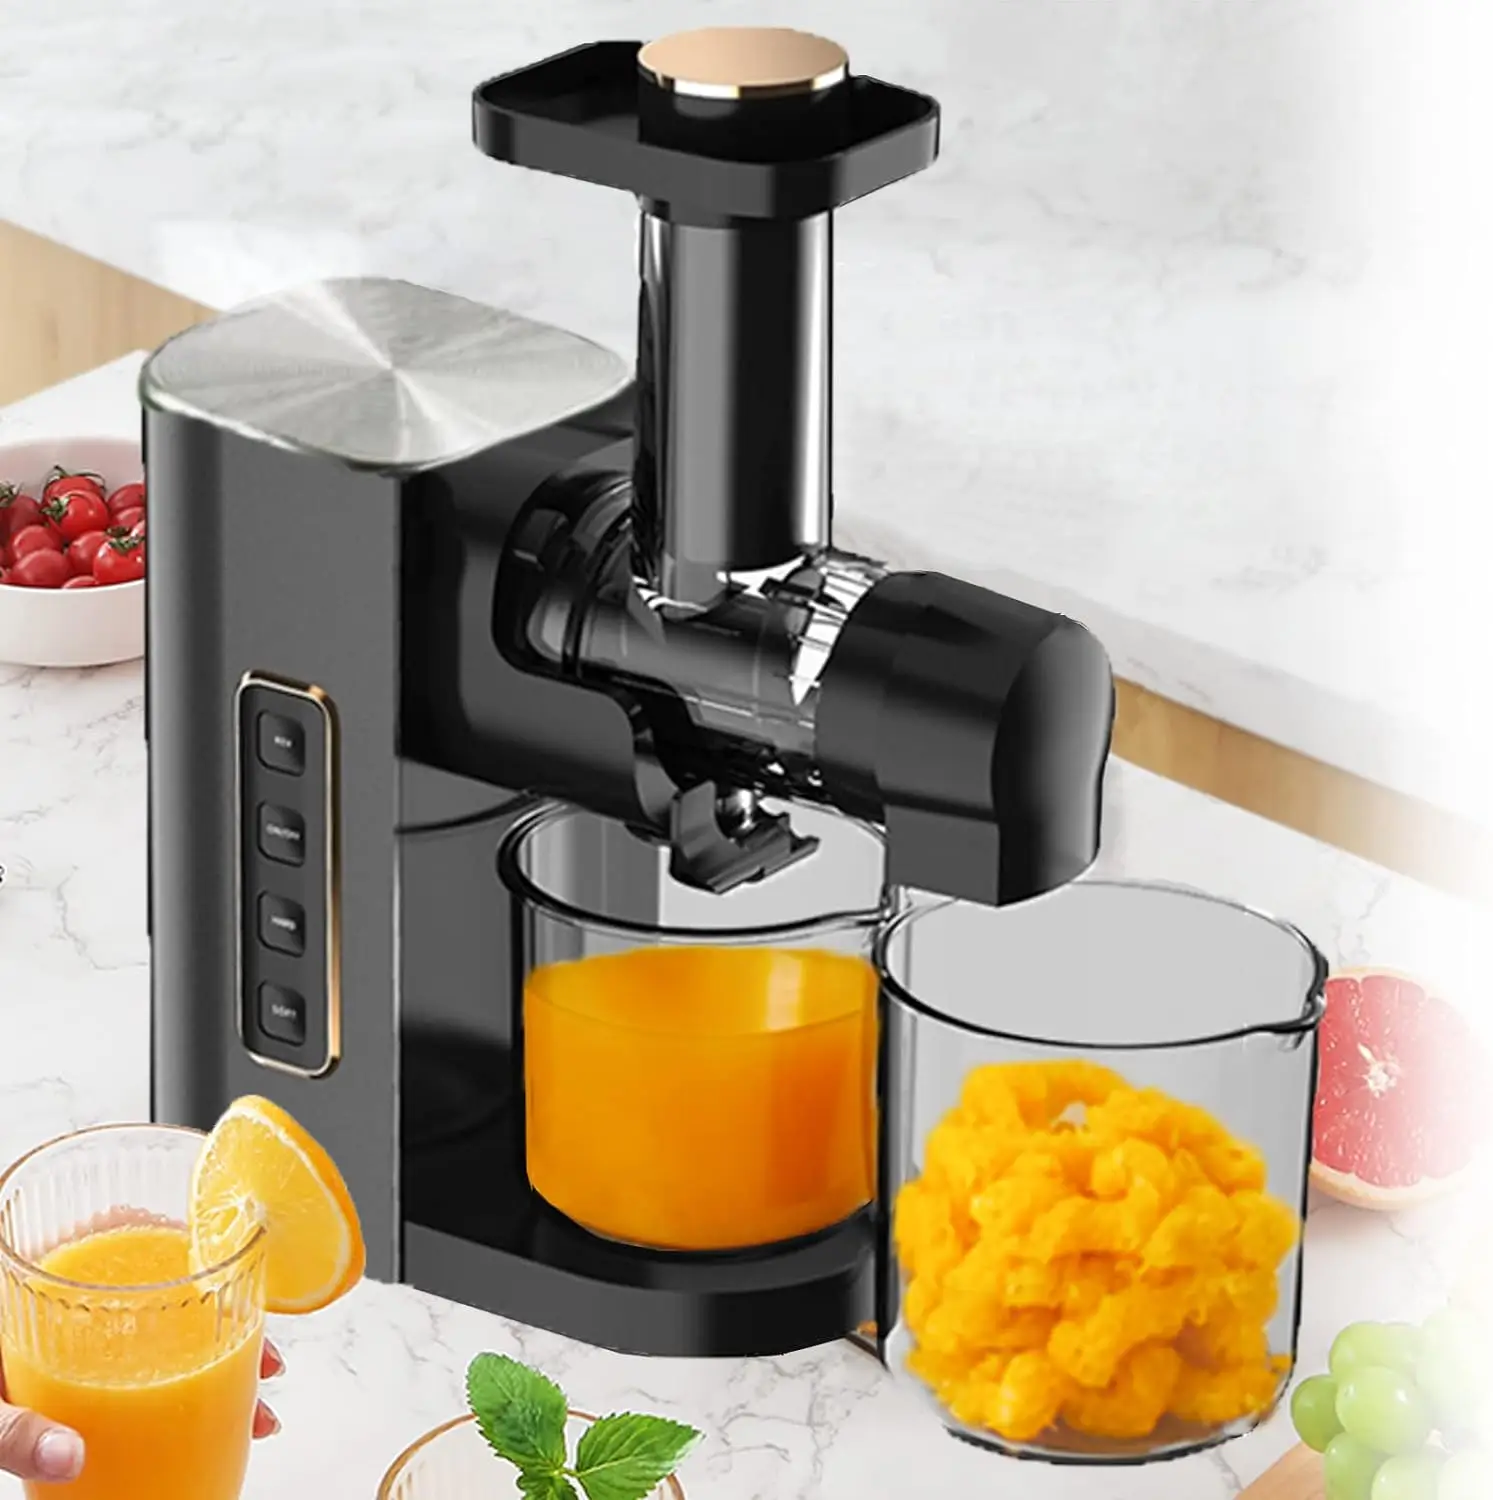 

Extractor with 2-Speed Modes - Cold Press Juicer Machine - Quiet Motor & Reverse Function - Easy to Clean Slow Masticating J Eye